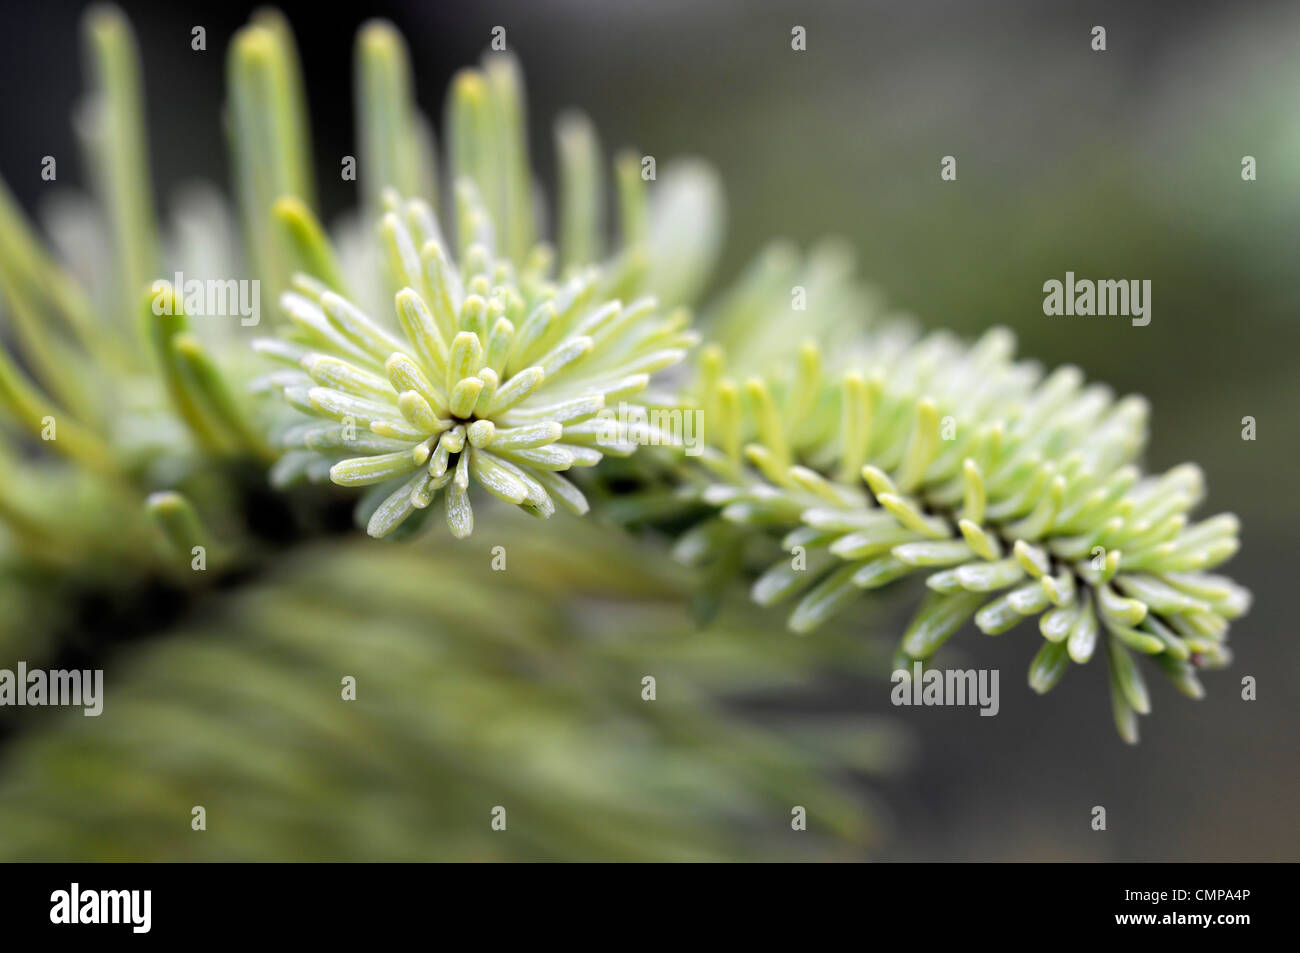 abies procera Noble fir closeup green foliage leaves needles plant portraits conifers evergreens shrubs coniferous branches tree Stock Photo